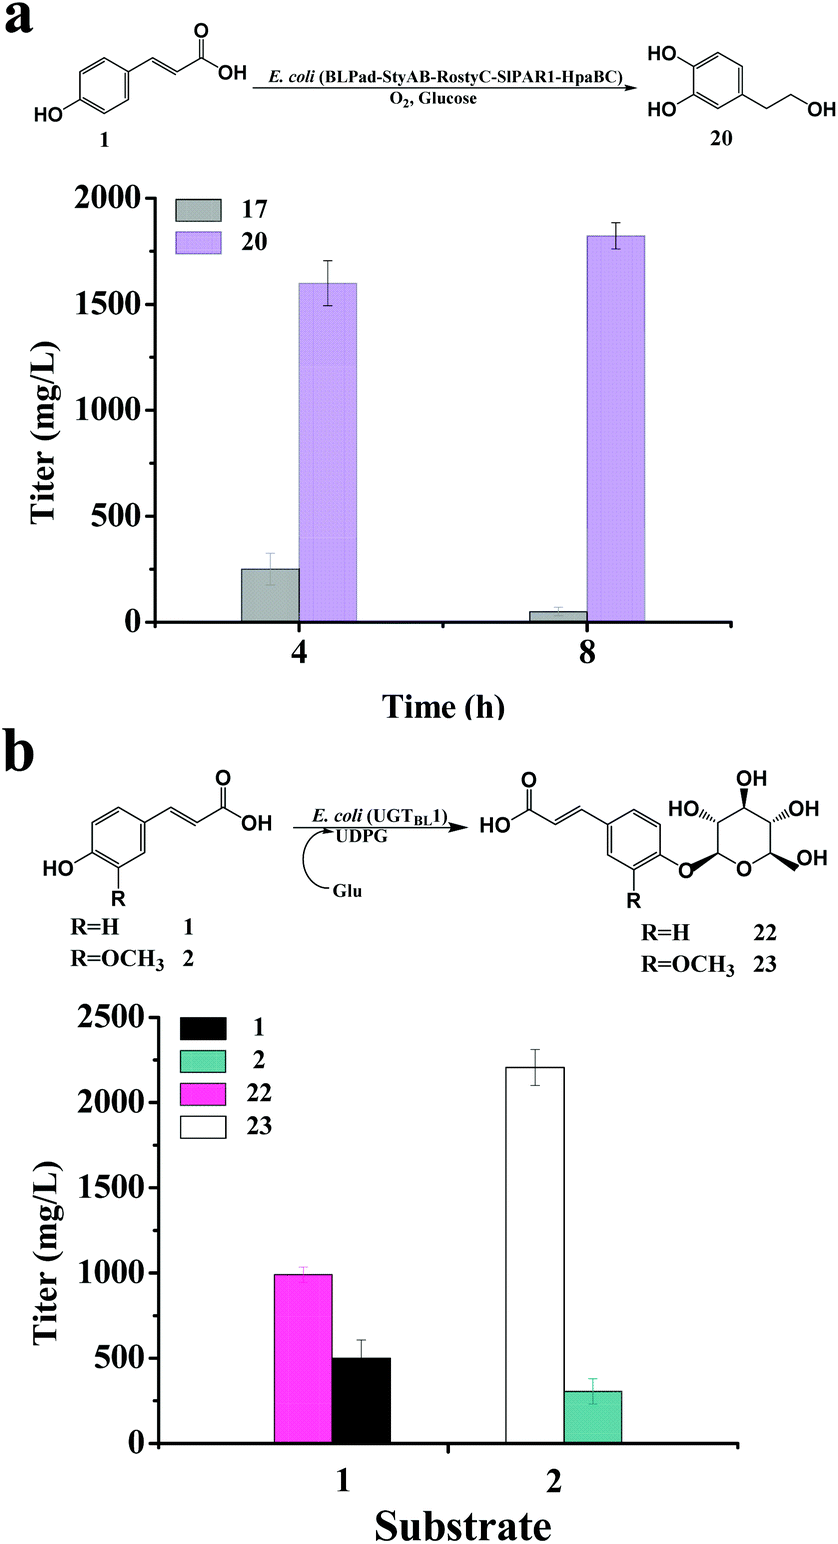 Rapid Biosynthesis Of Phenolic Glycosides And Their Derivatives From Biomass Derived Hydroxycinnamates Green Chemistry Rsc Publishing Doi 10 1039 D0gc03595e